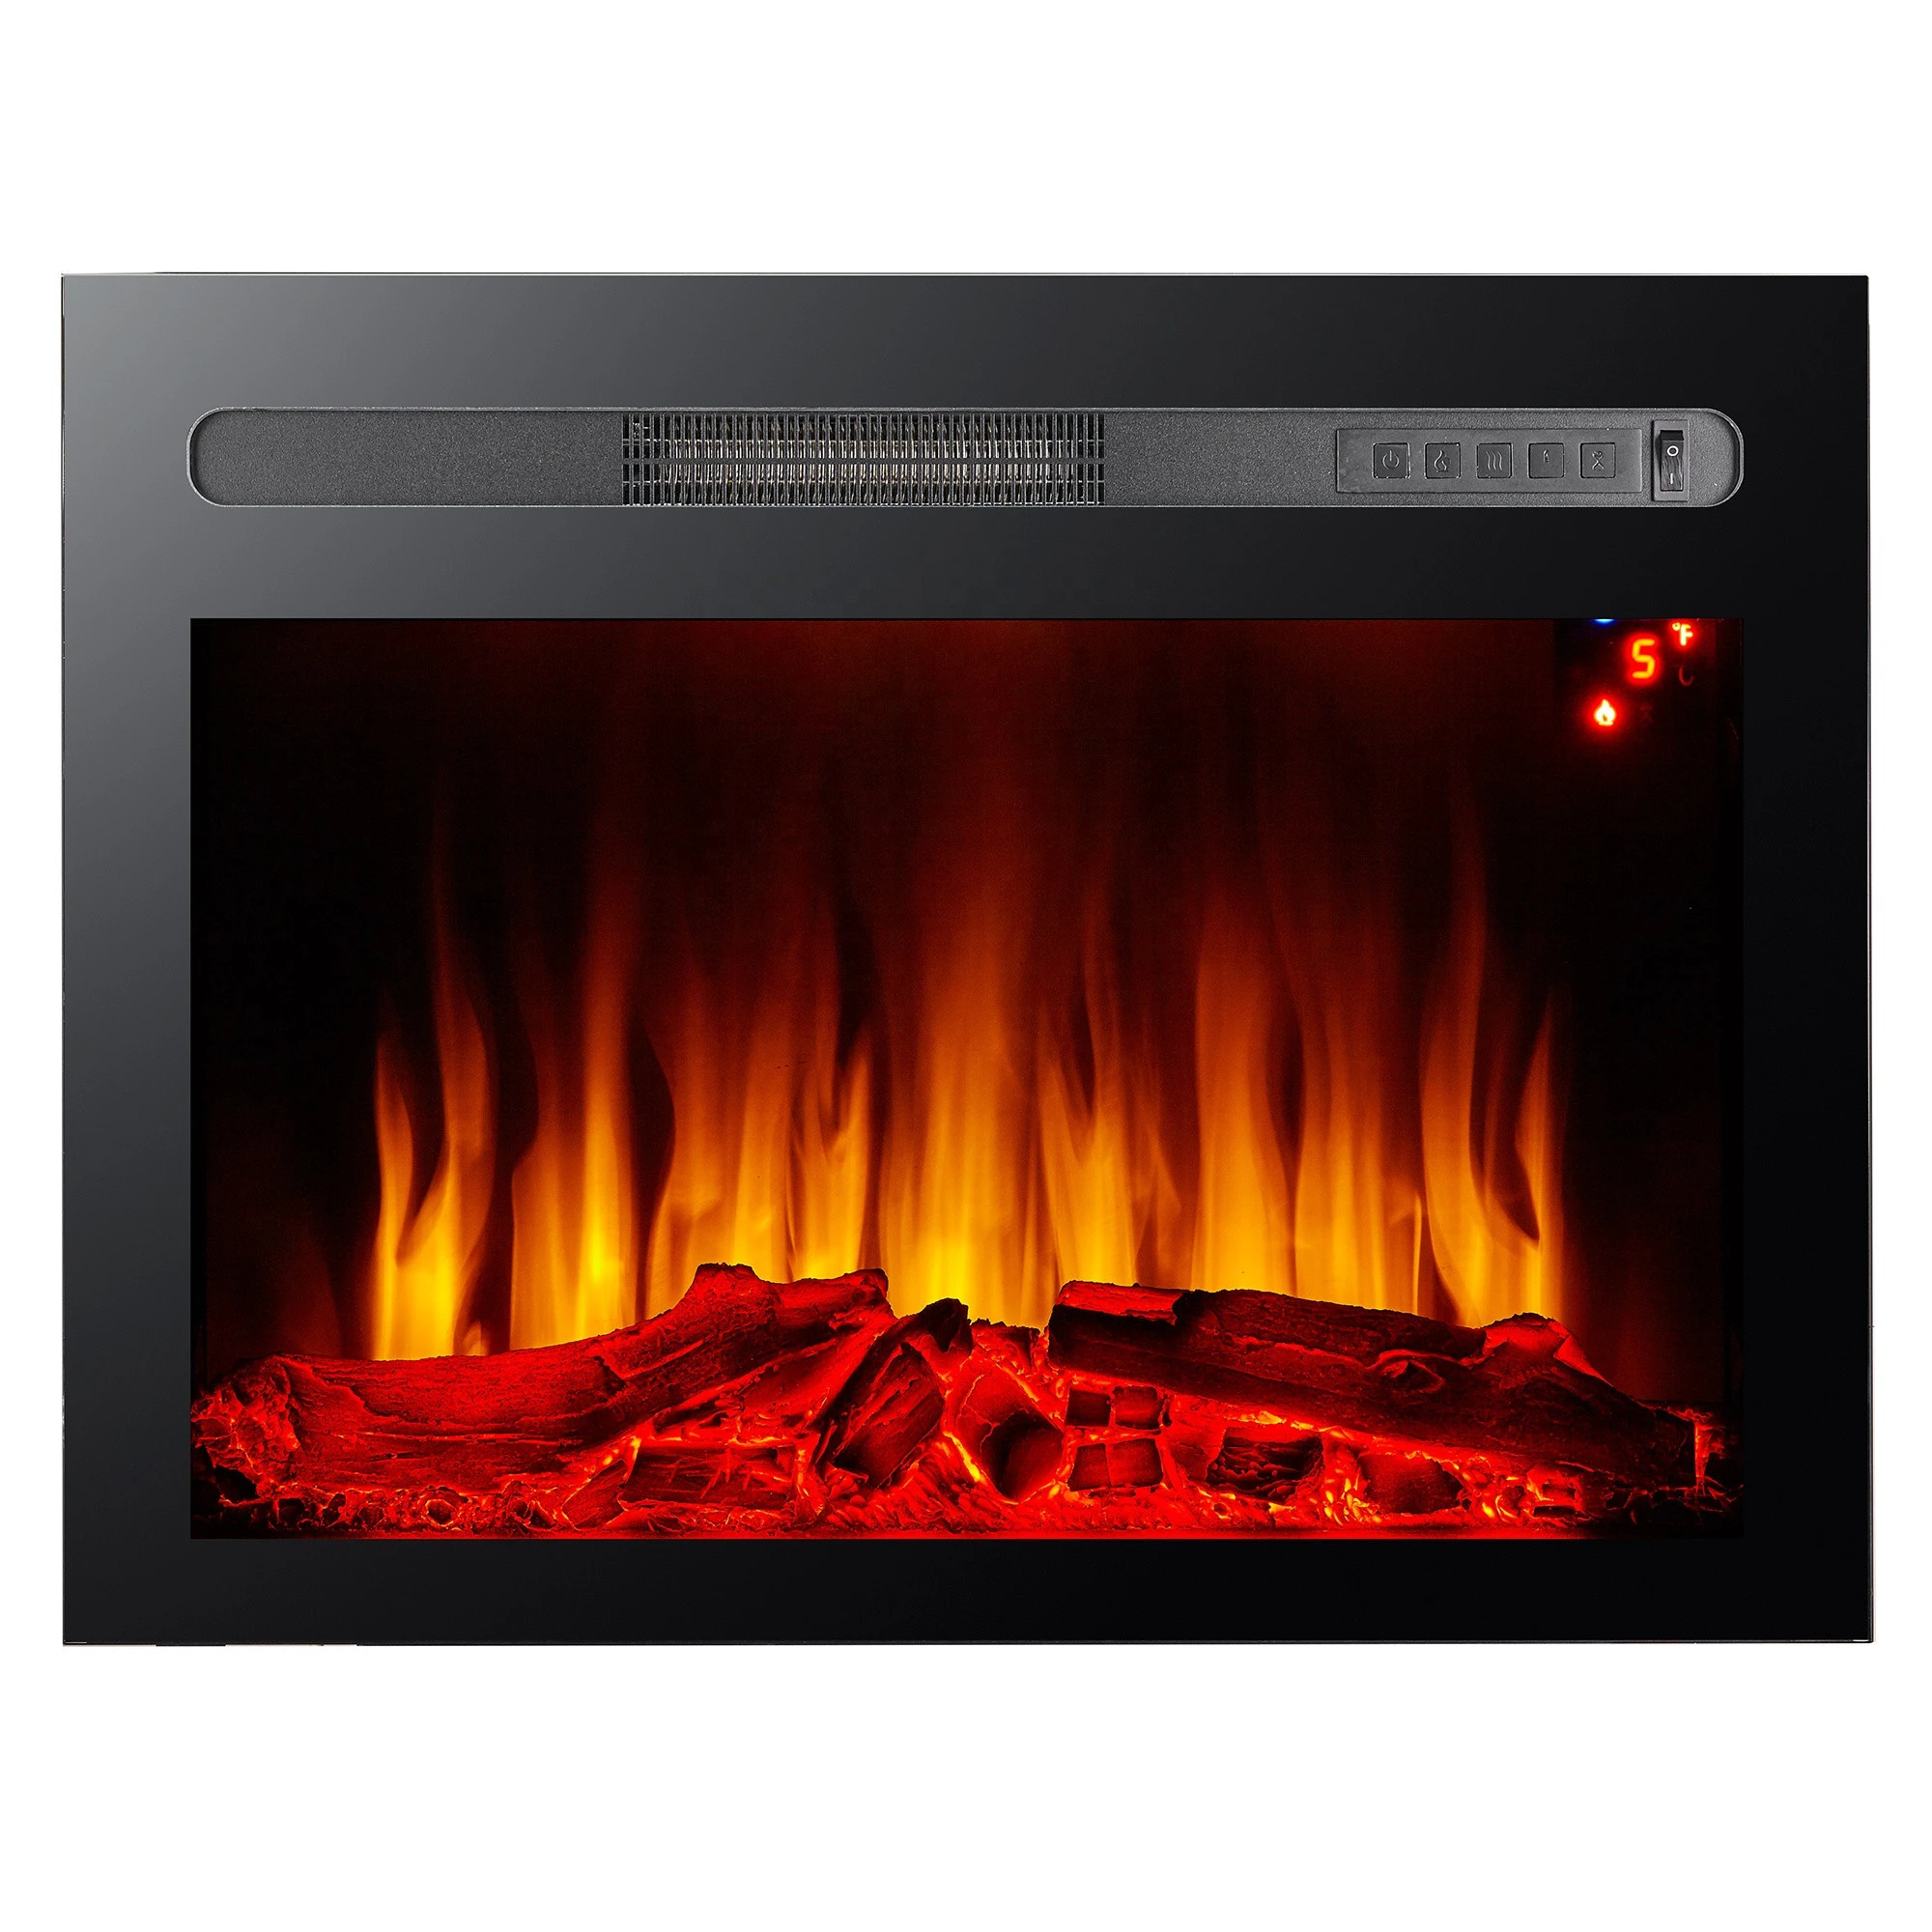 26 inch built-in or insert electric fireplace heater with remote control